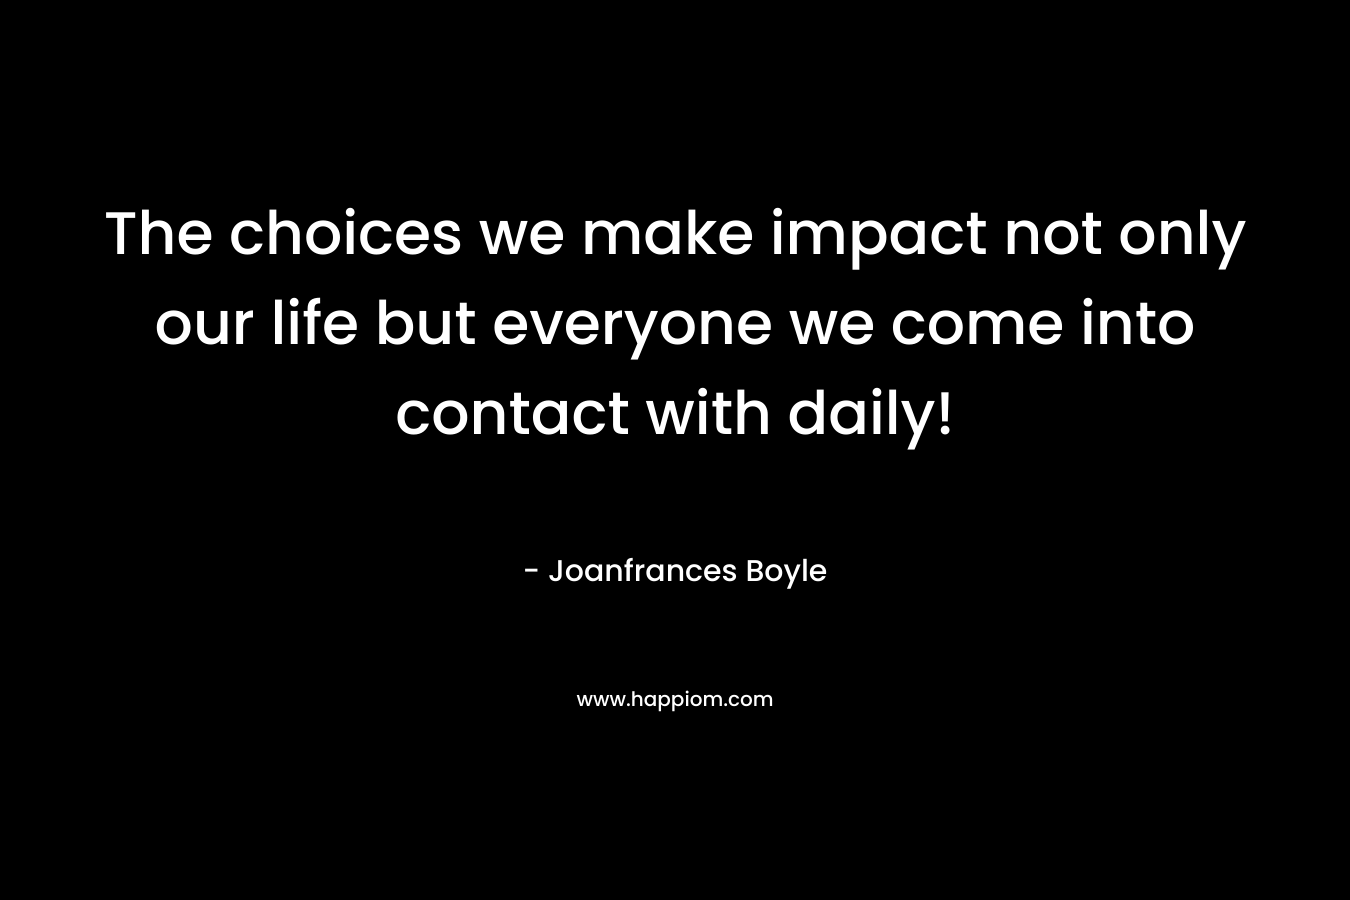 The choices we make impact not only our life but everyone we come into contact with daily!